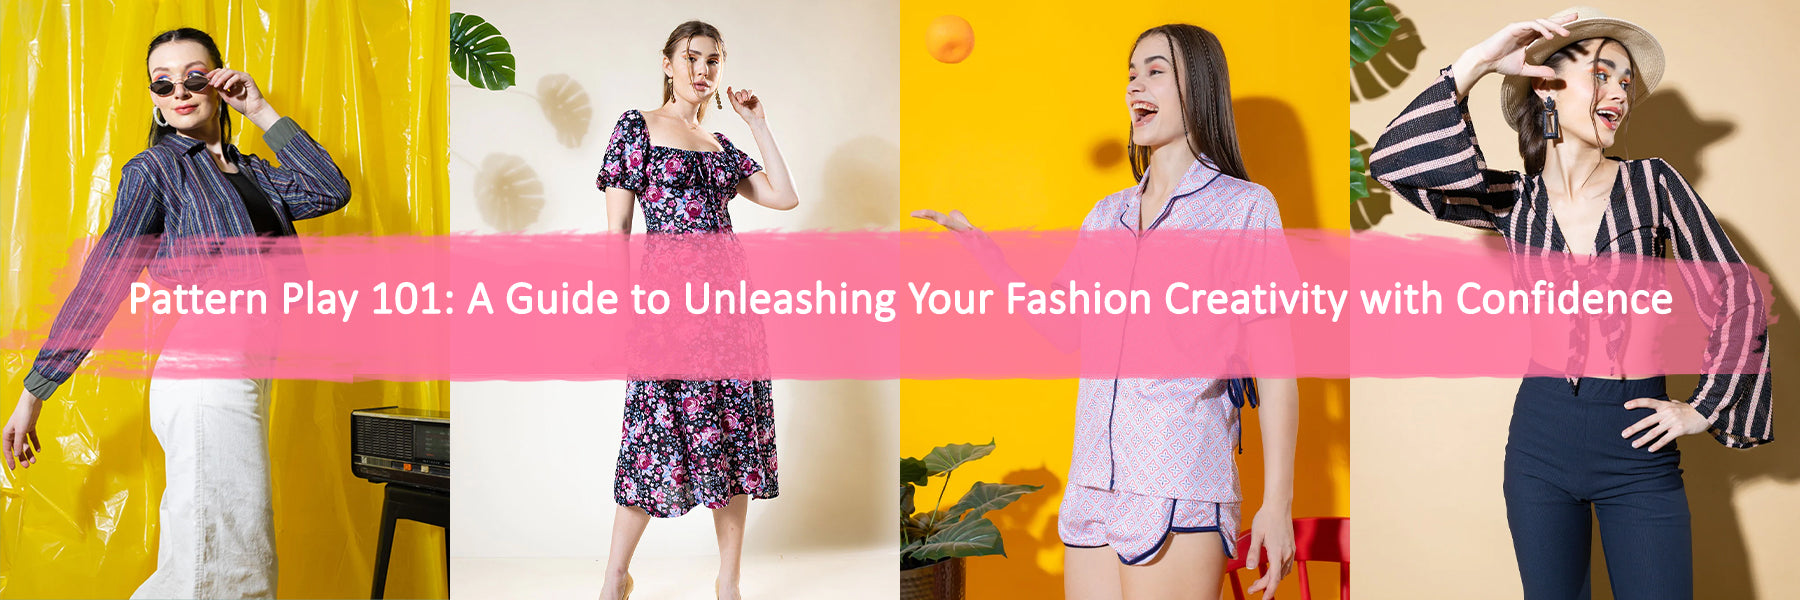 Pattern Play 101: A Guide to Unleashing Your Fashion Creativity with Confidence